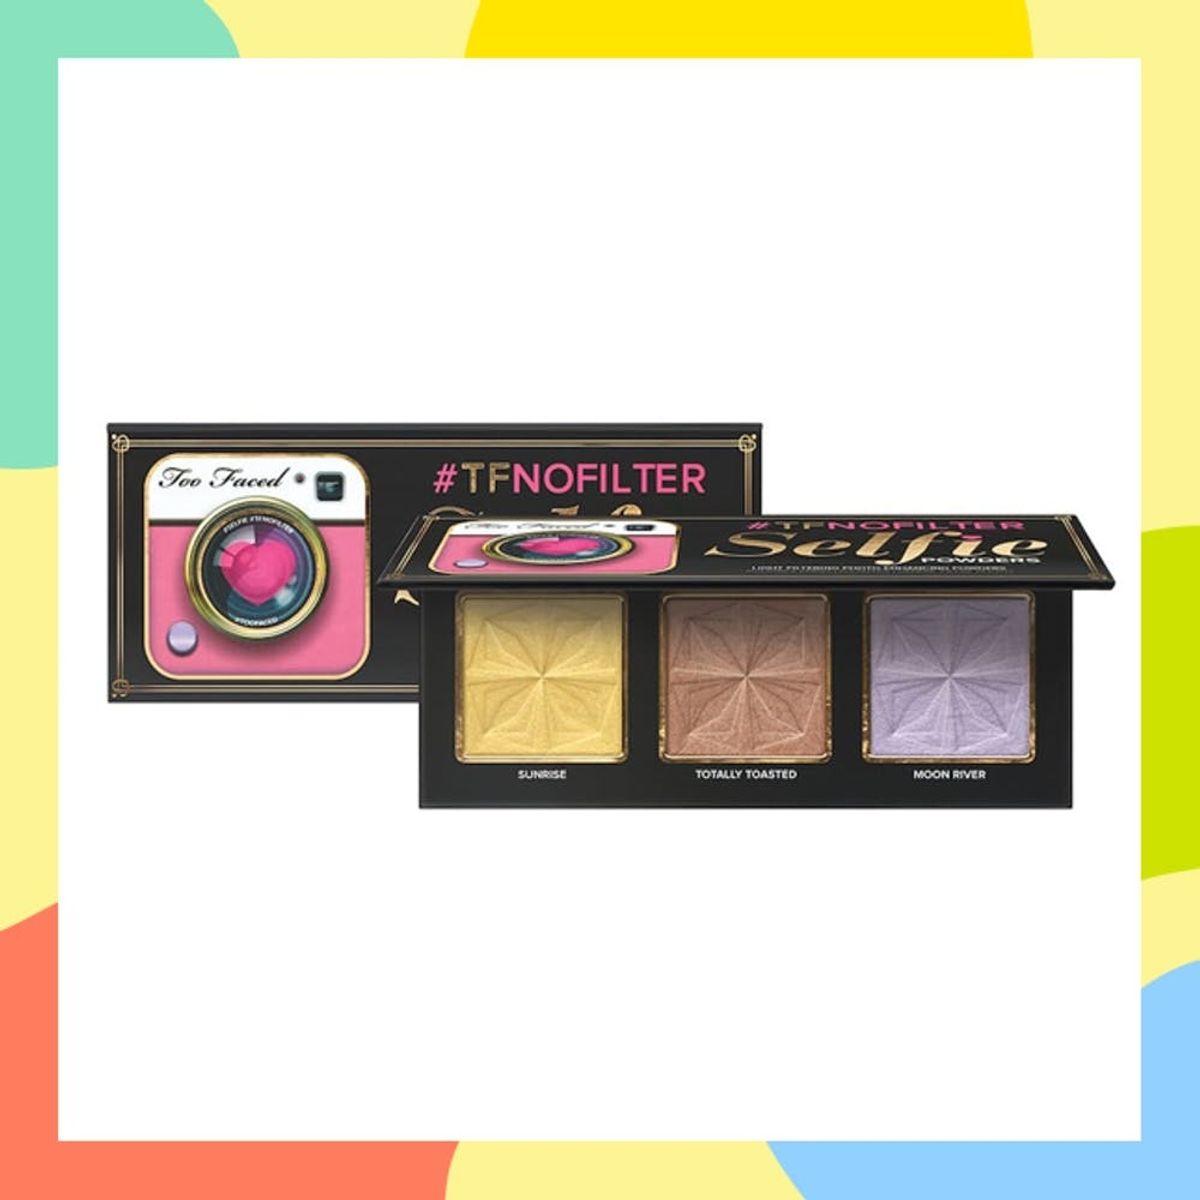 Too Faced Is Offering 65 Percent Off Right Now — Just Because